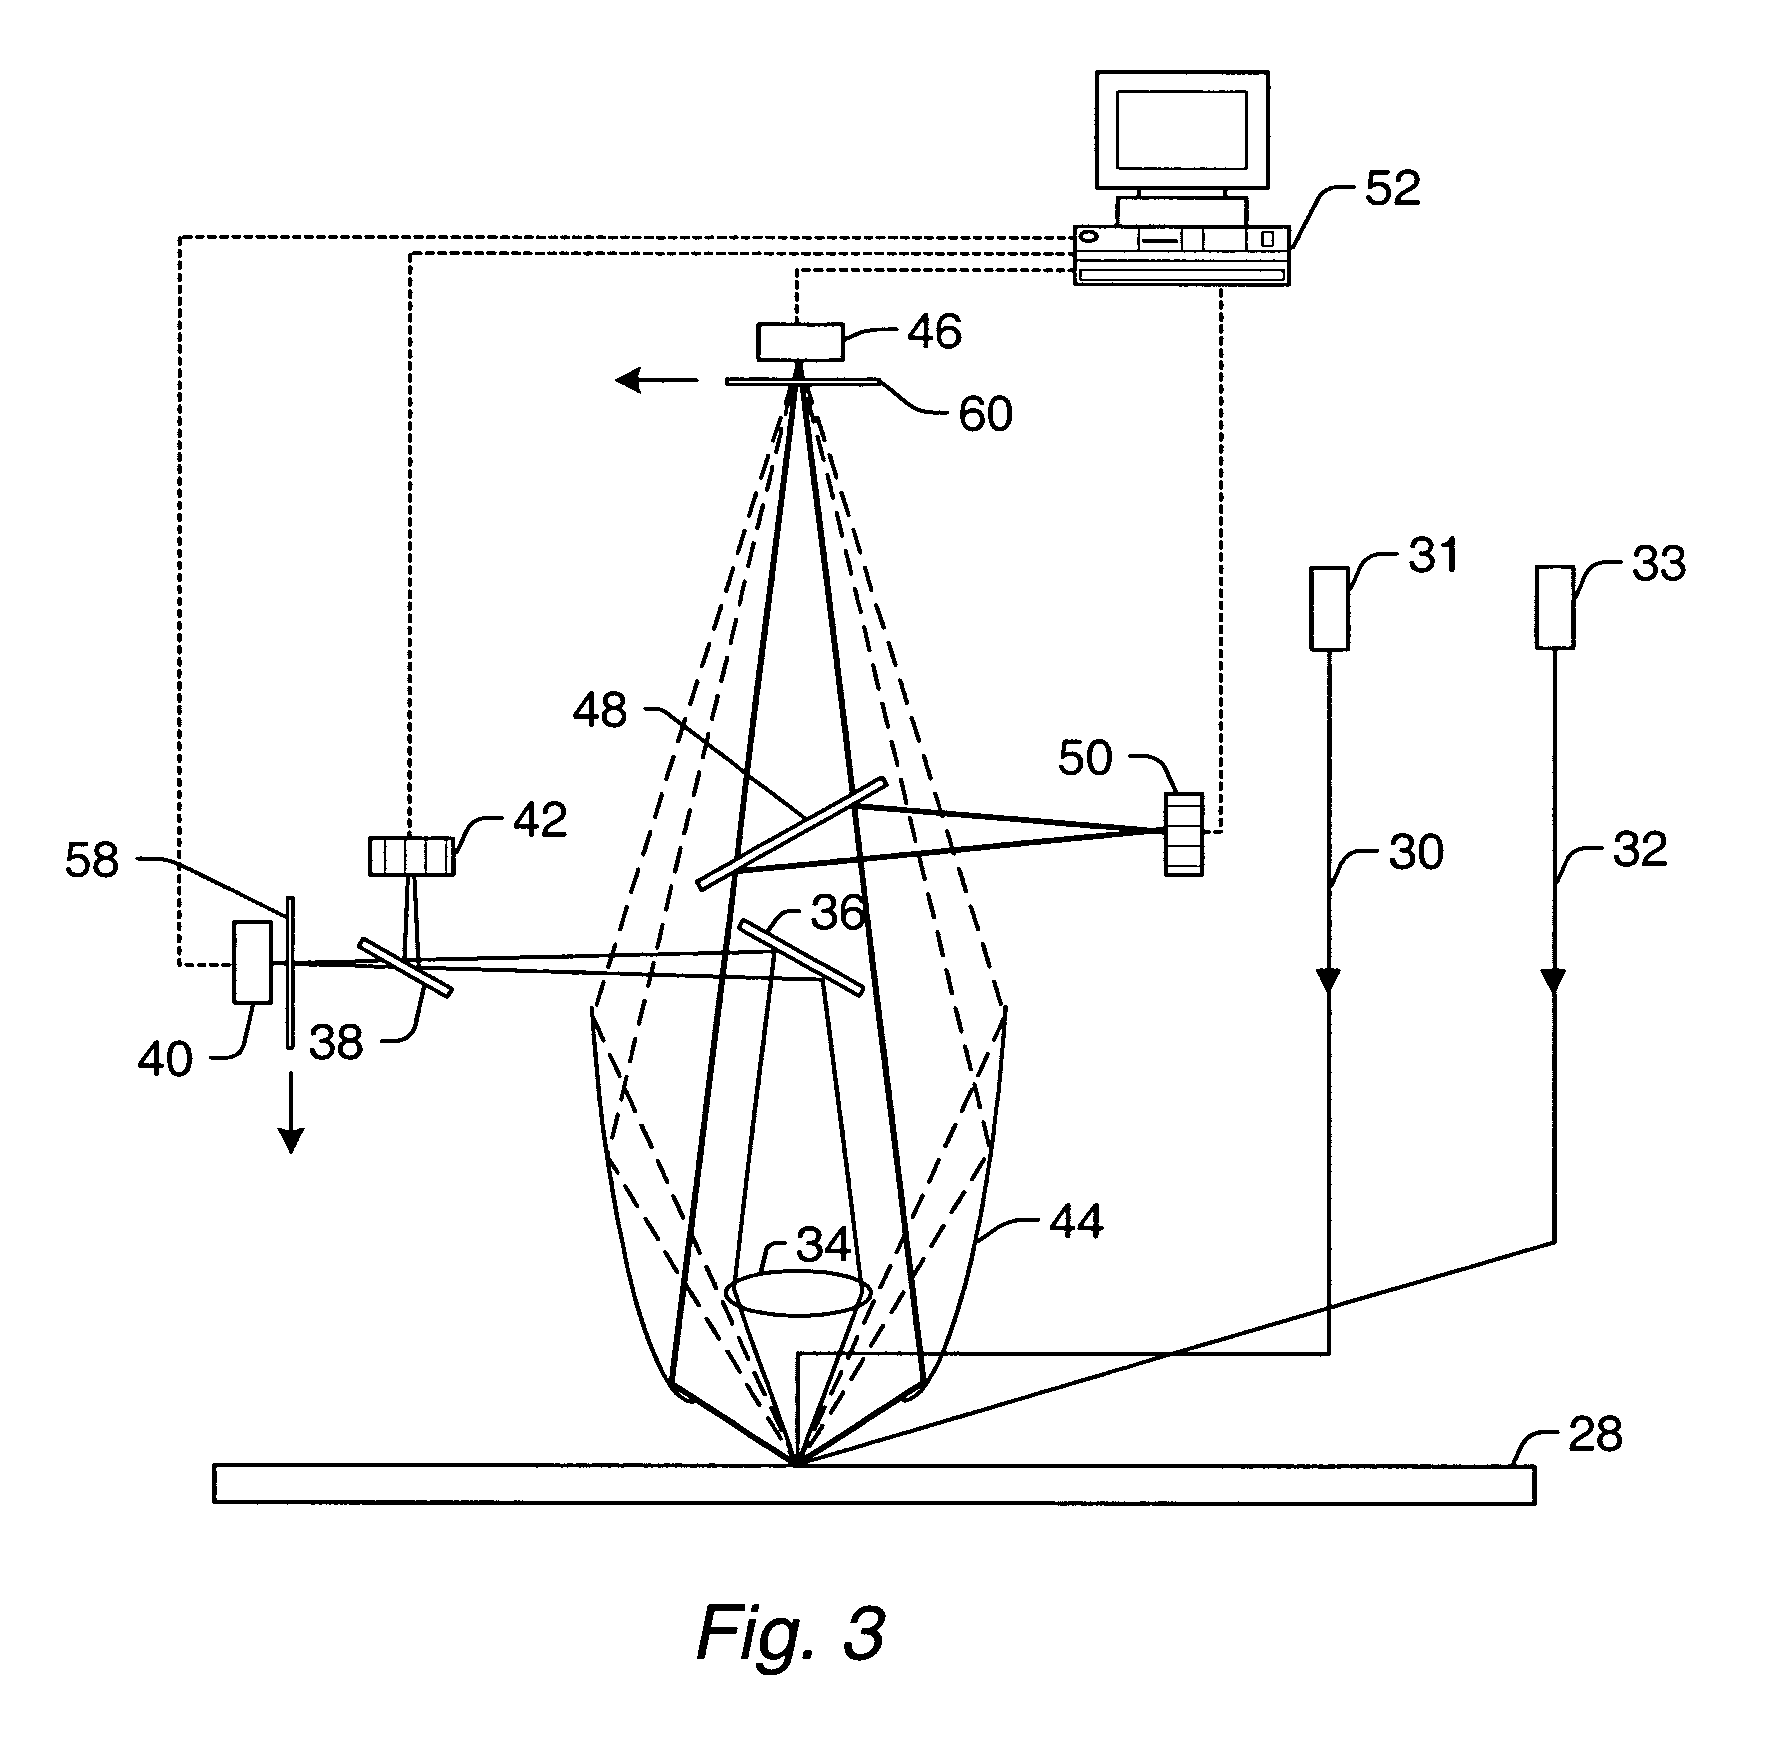 Methods and systems for inspection of an entire wafer surface using multiple detection channels